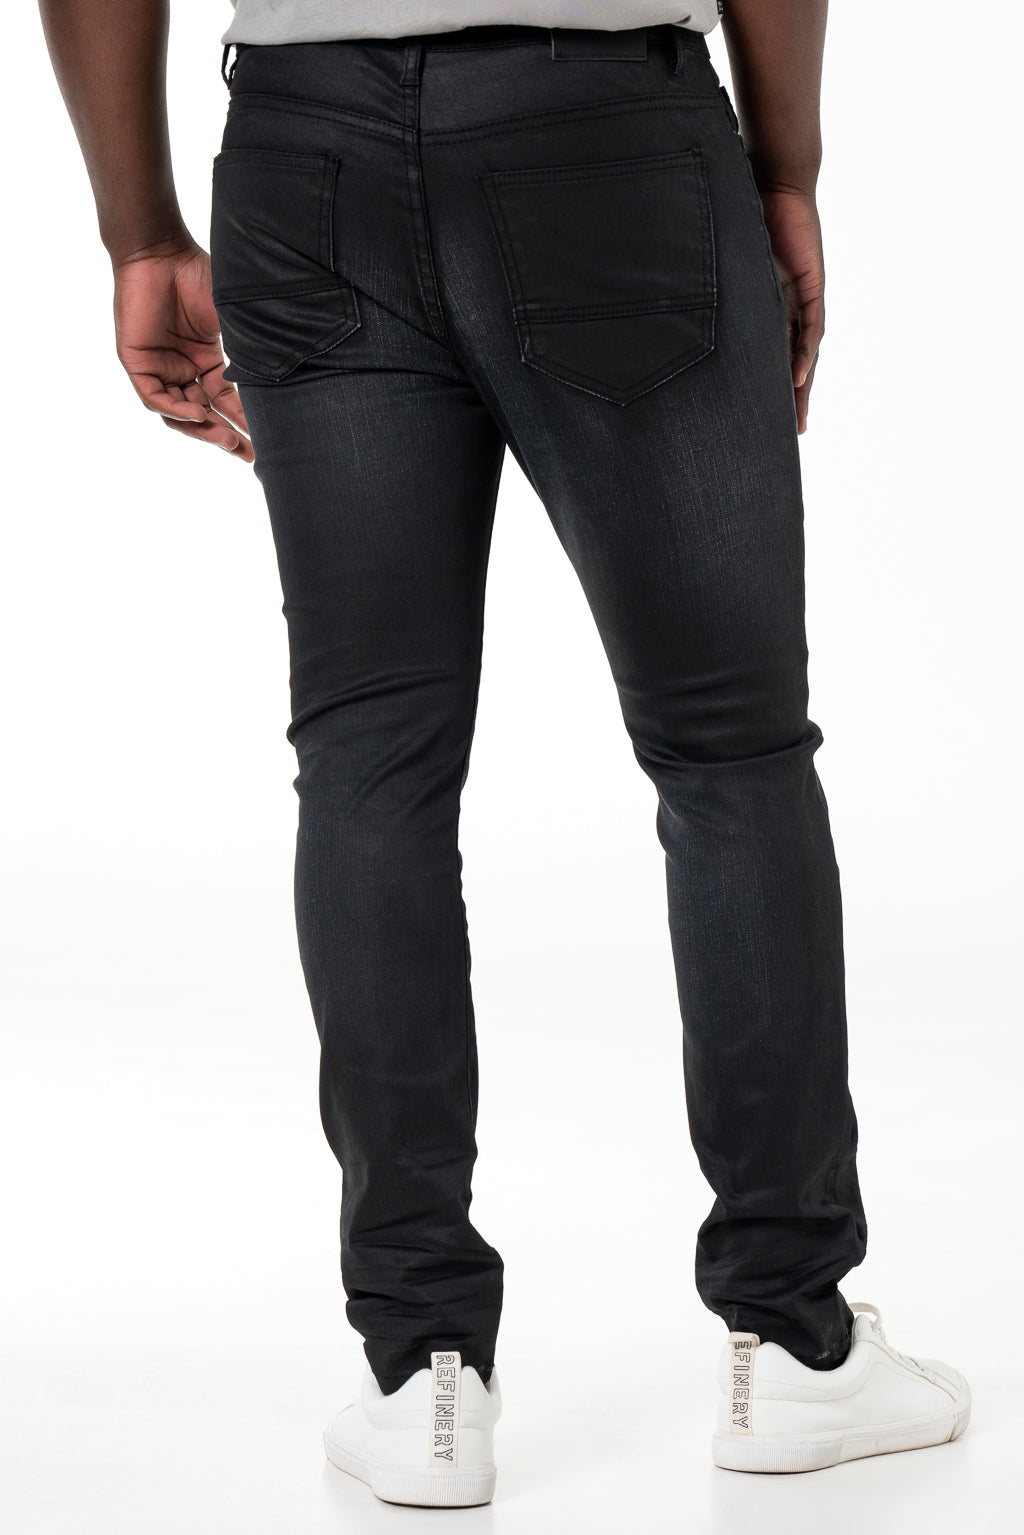 Rf02 Black Coated Jeans _ 137509 _ Black from REFINERY – Refinery